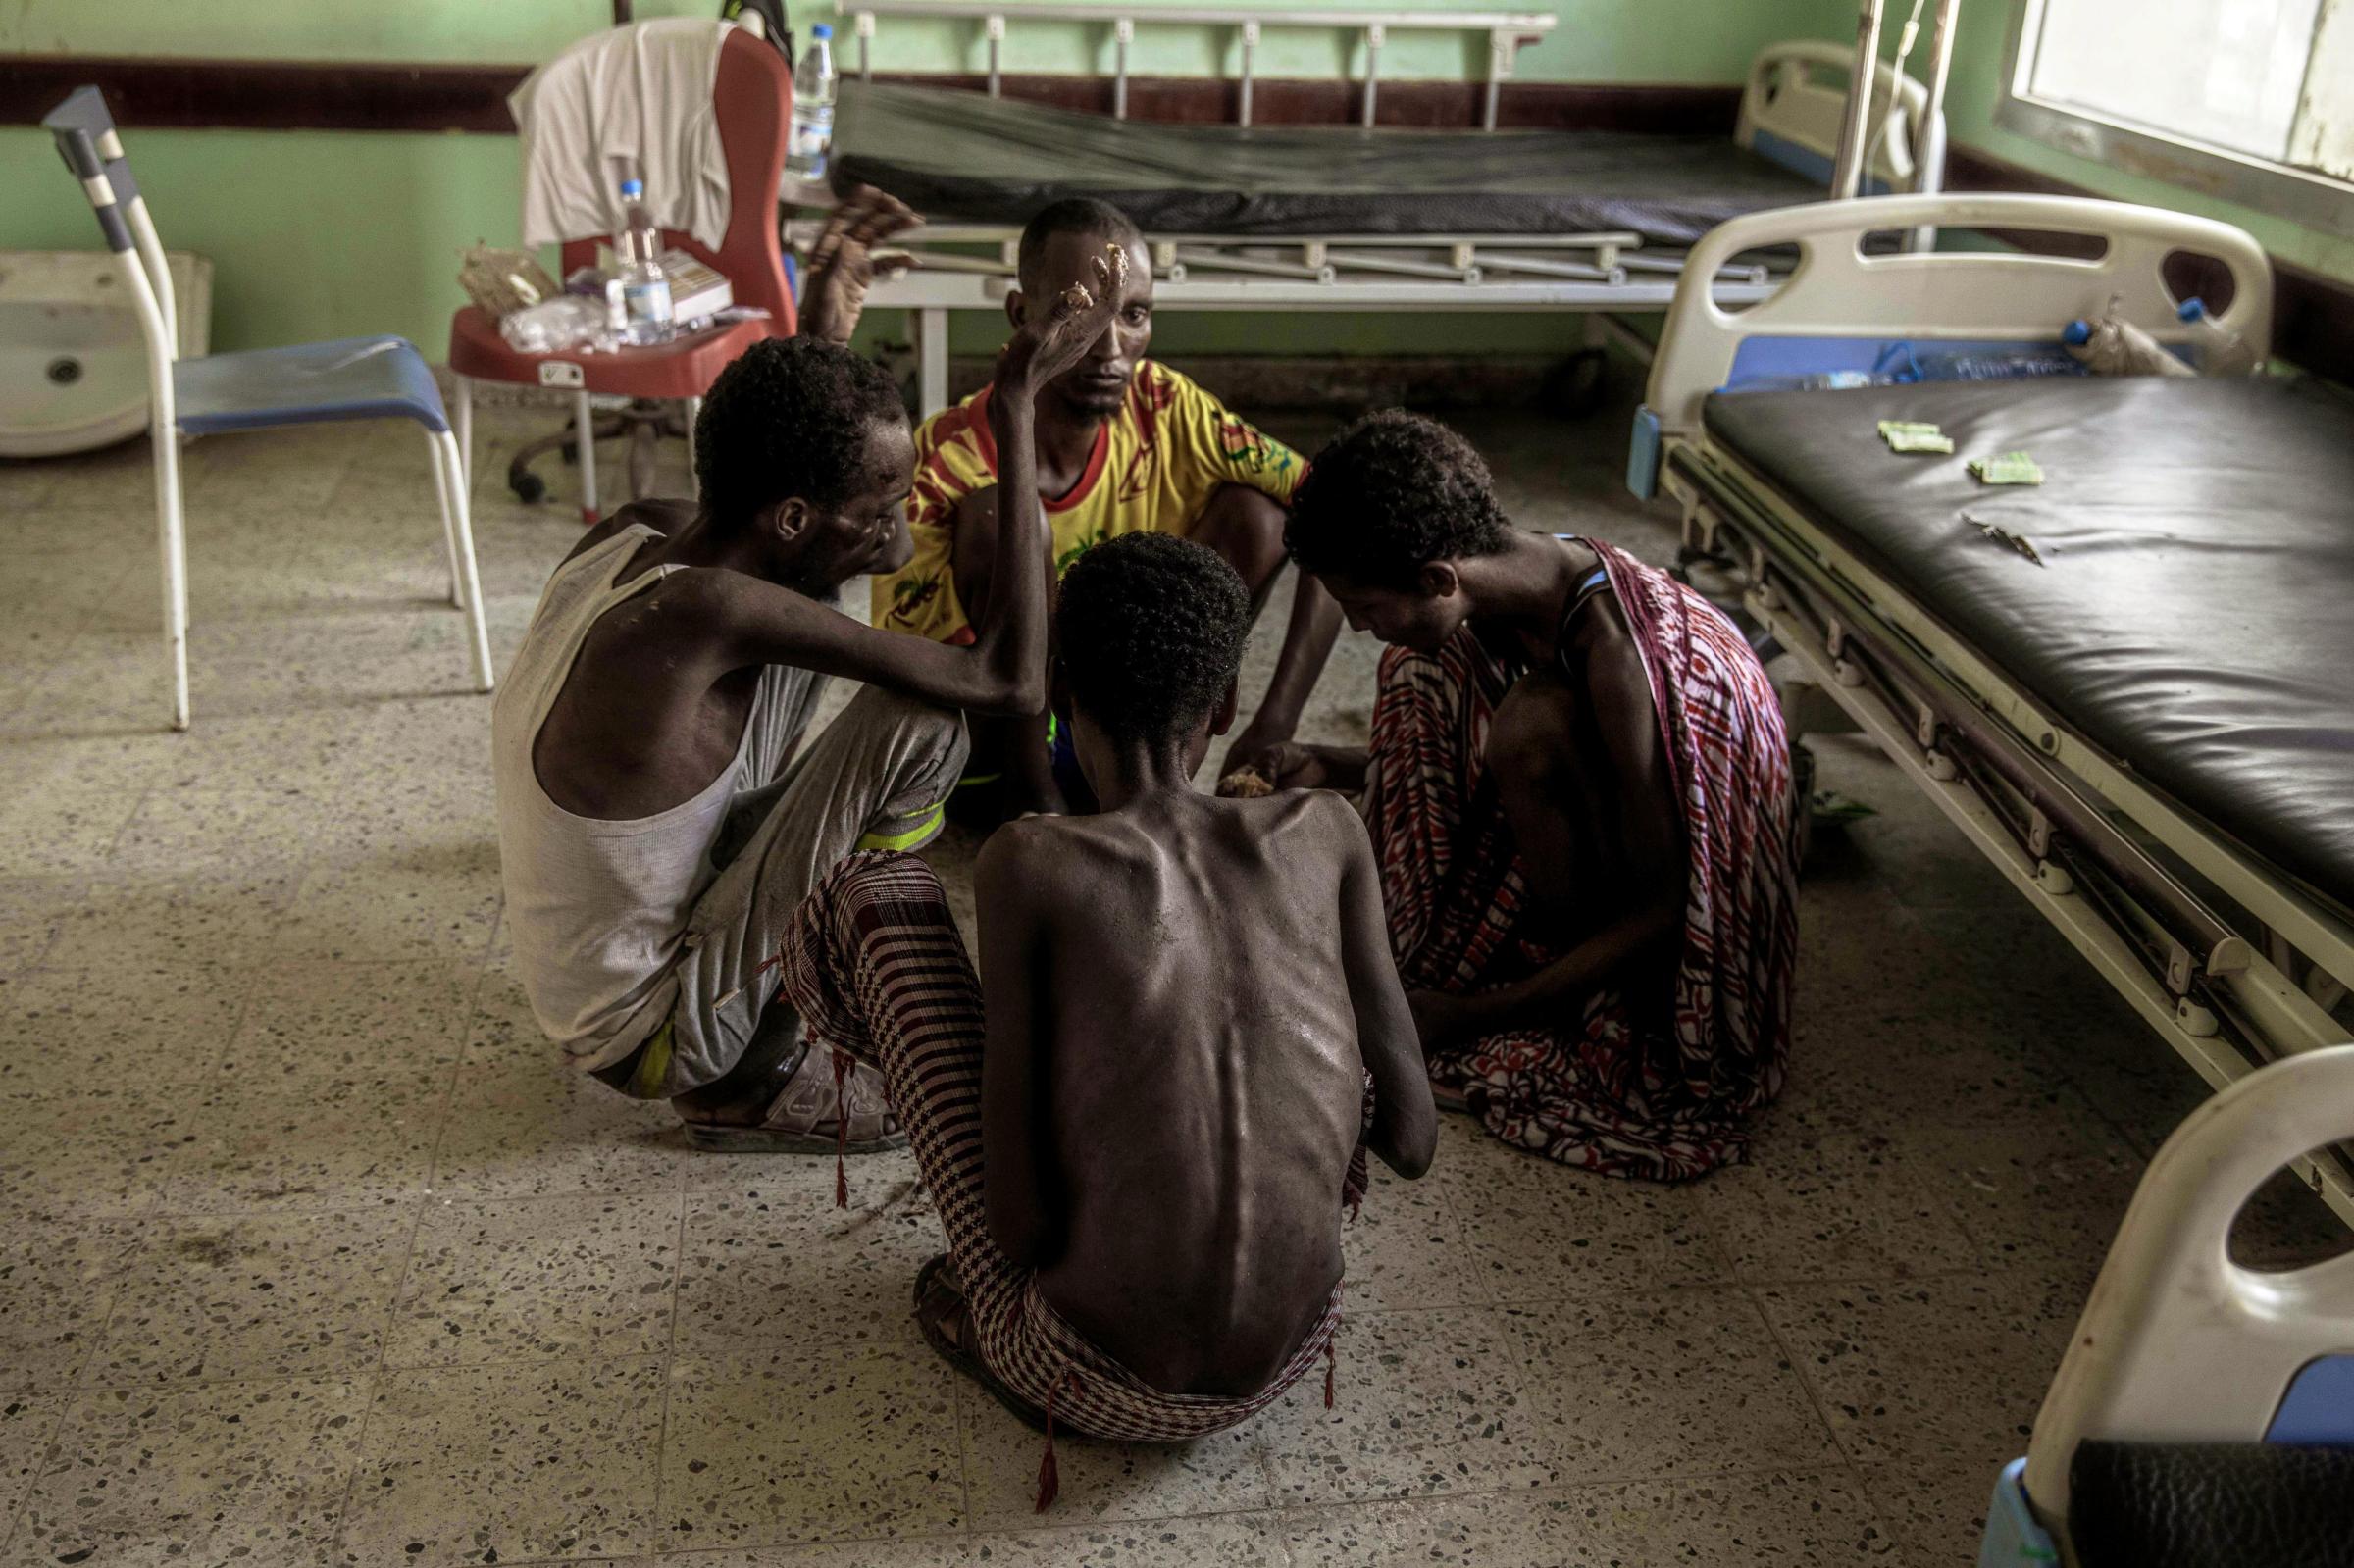  Ethiopian migrants, from center background to right, Gamal Hassan, Abdo Yassin, Mohammed Hussein, and Abdu Mohammed, who had been imprisoned by traffickers for months, fed once a day with scraps of bread and a sip of water, pick rice from a bowl on the floor, at the Ras al-Ara Hospital in Lahj, Yemen. Starvation is a punishment used by the traffickers to wear down their victims. Their bones protruded from their backs, their rib cages stood out sharply. With no fat on their bodies, they sat on rolled-up cloth because it was too painful to sit directly on bone. 